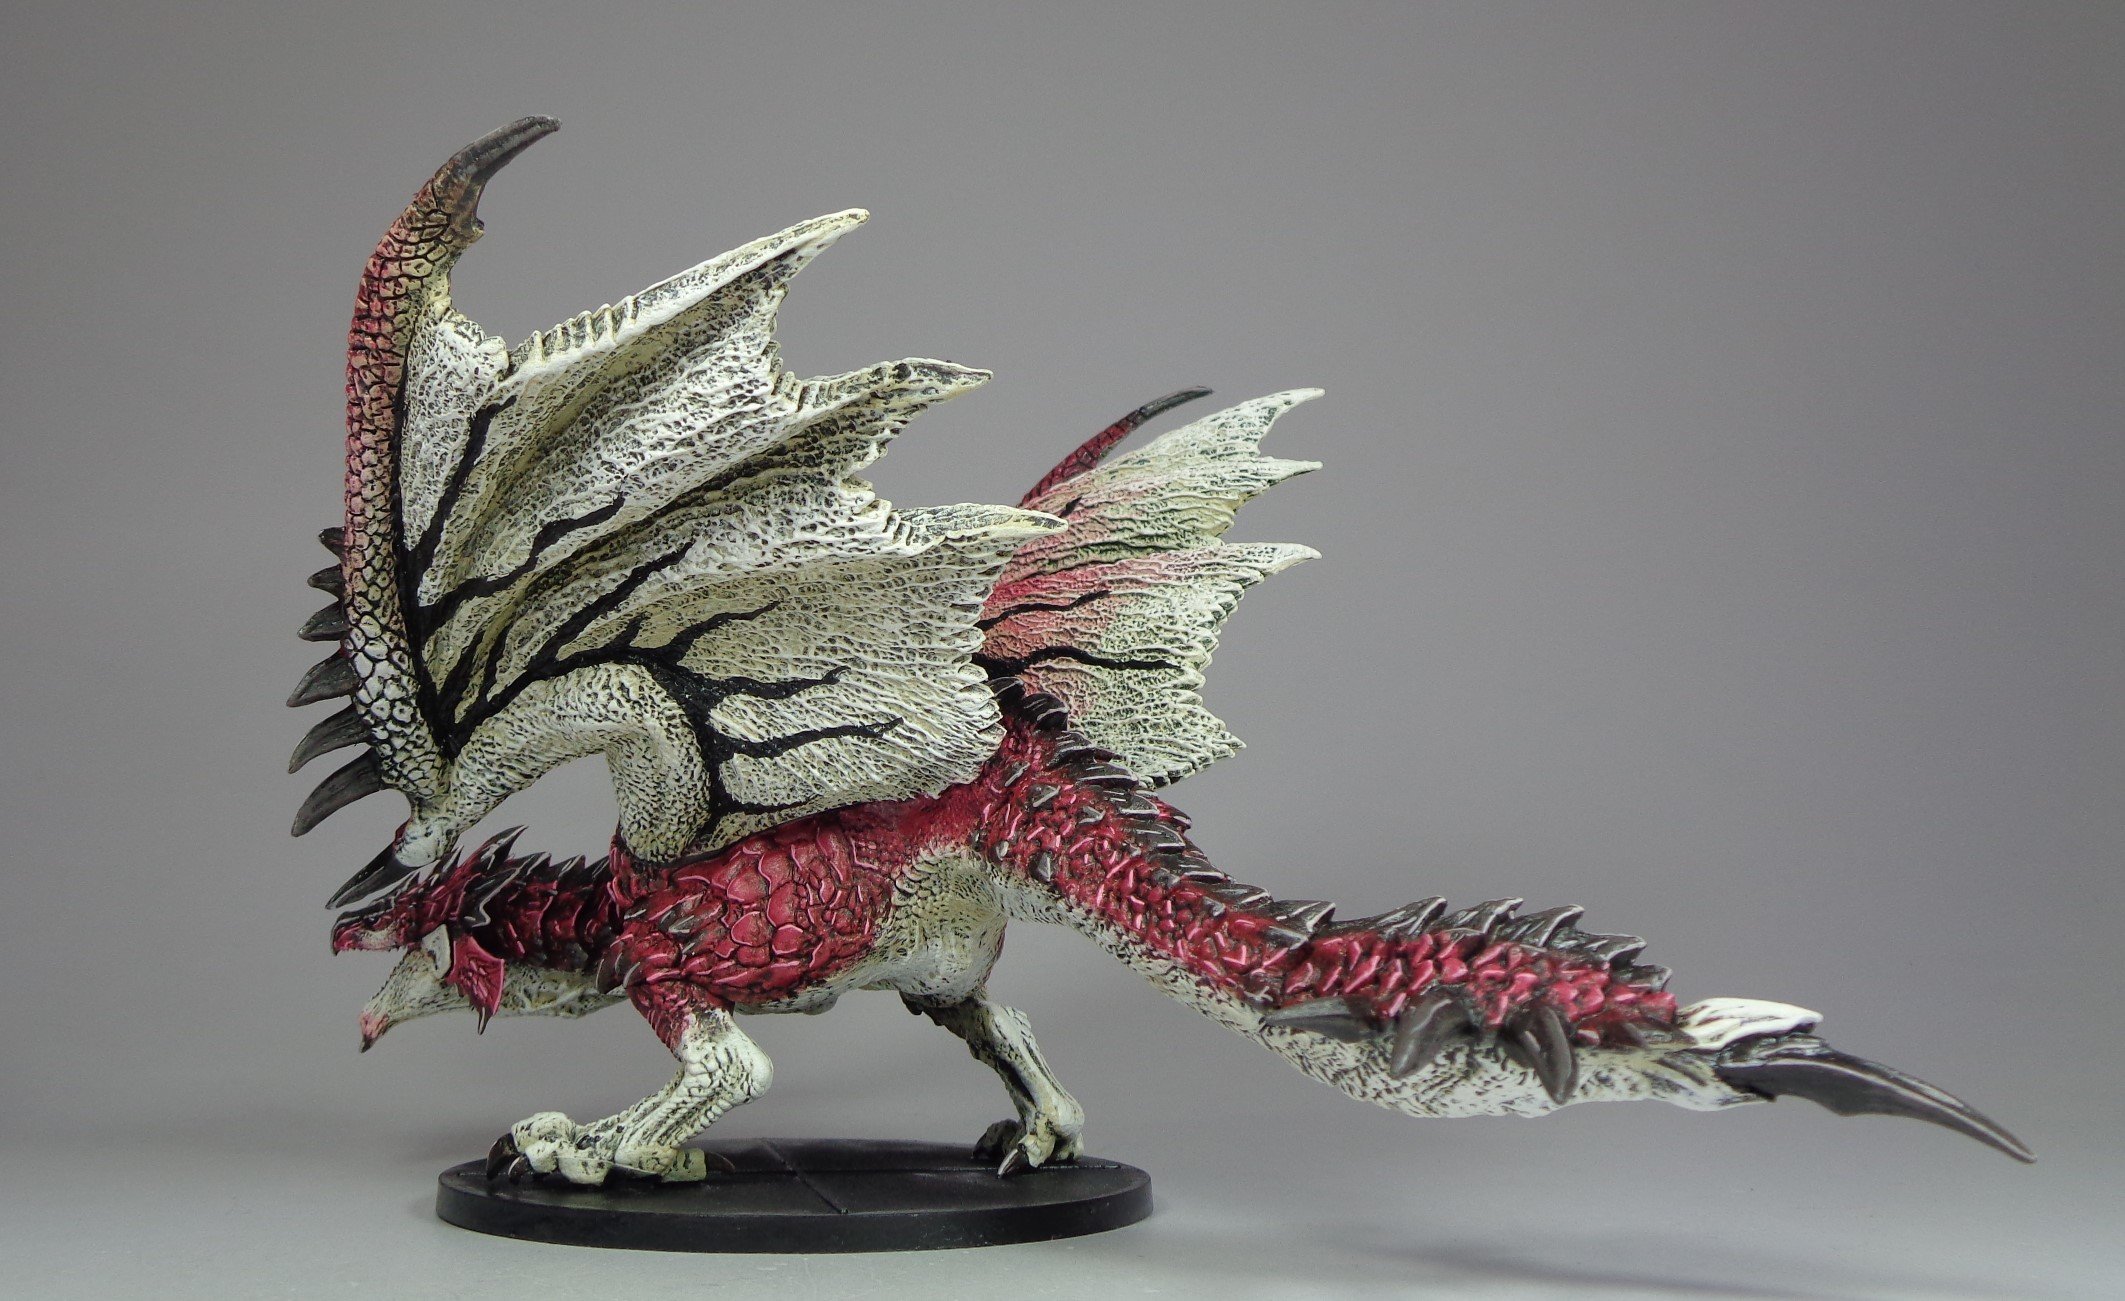 We Painted The Monster Hunter World Boardgame — Paintedfigs Miniature  Painting Service